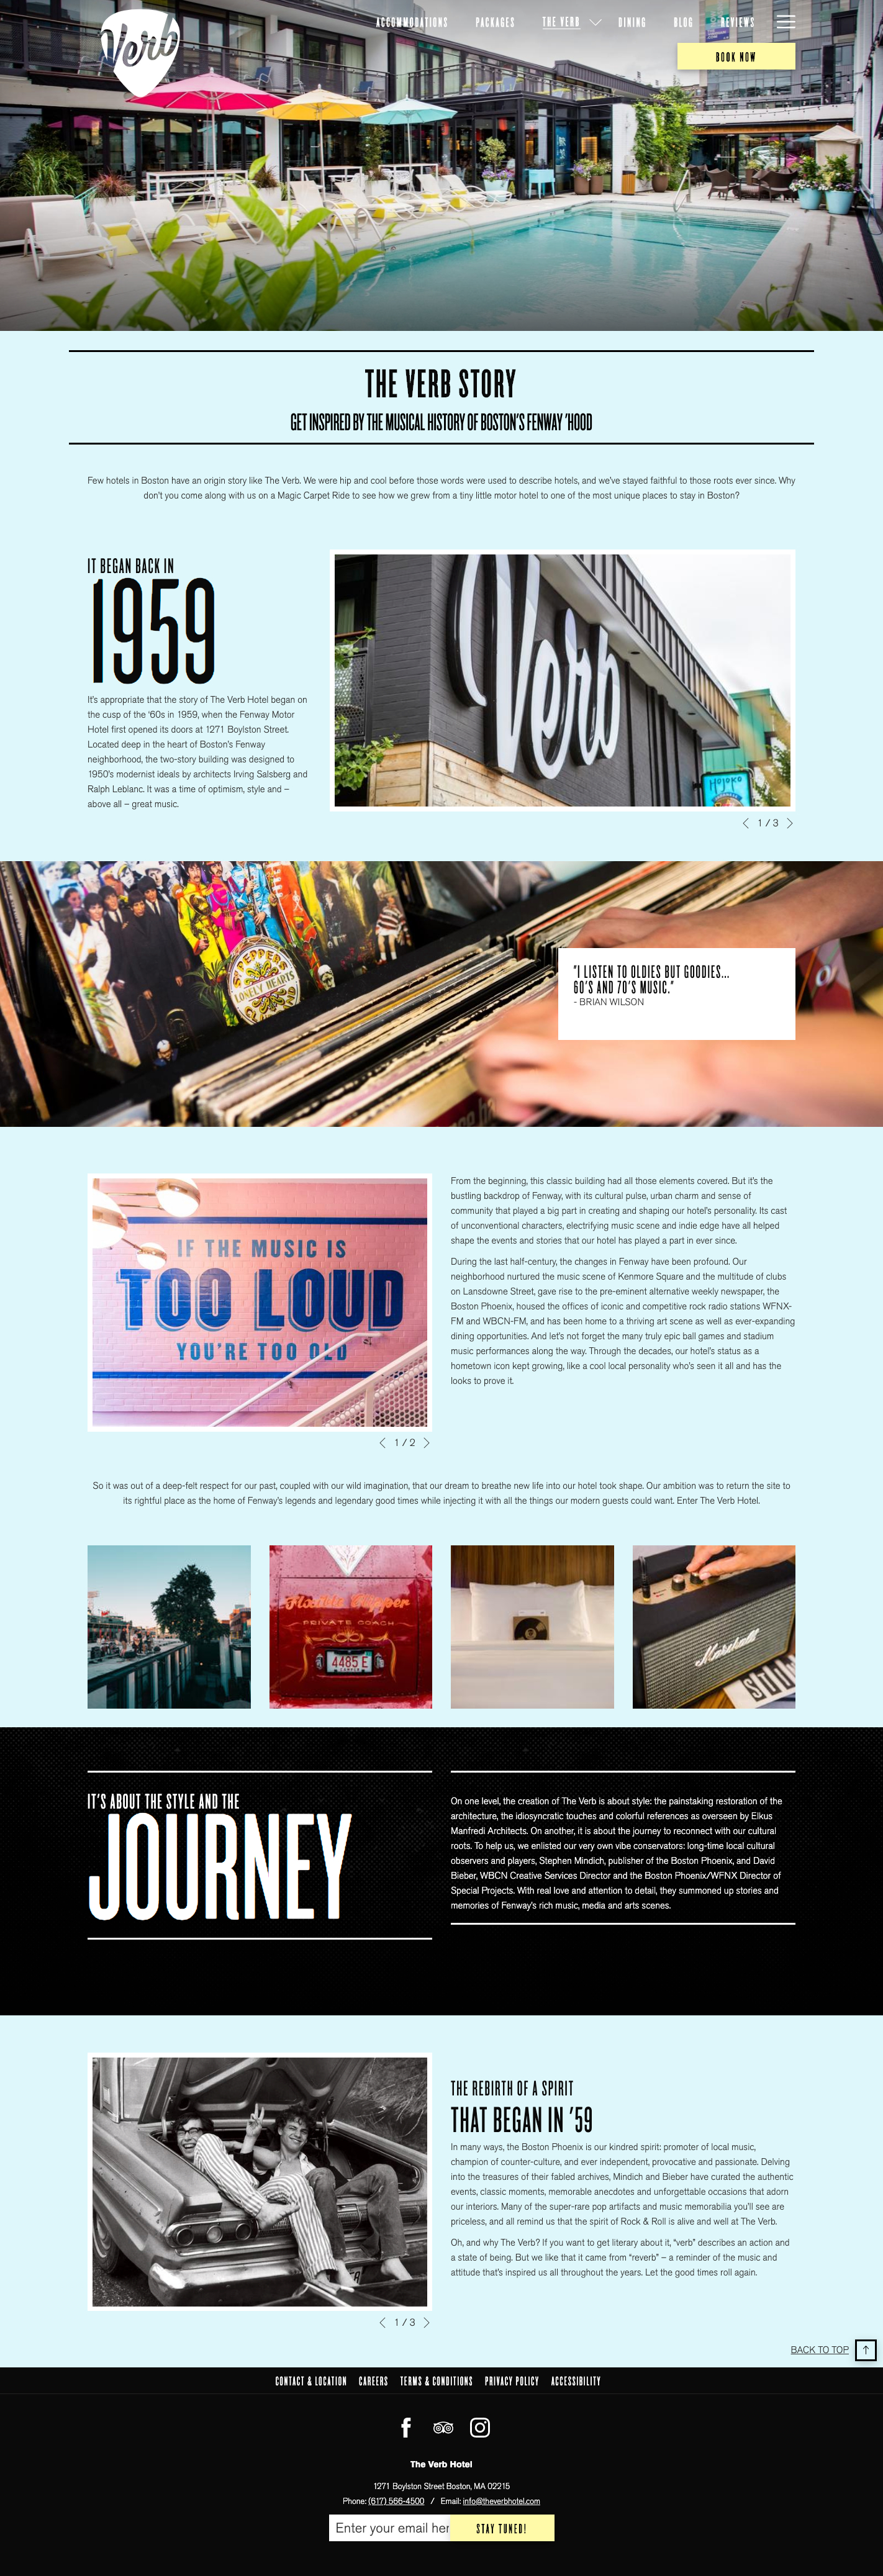 The Verb Hotel - The Verb Story Page Design